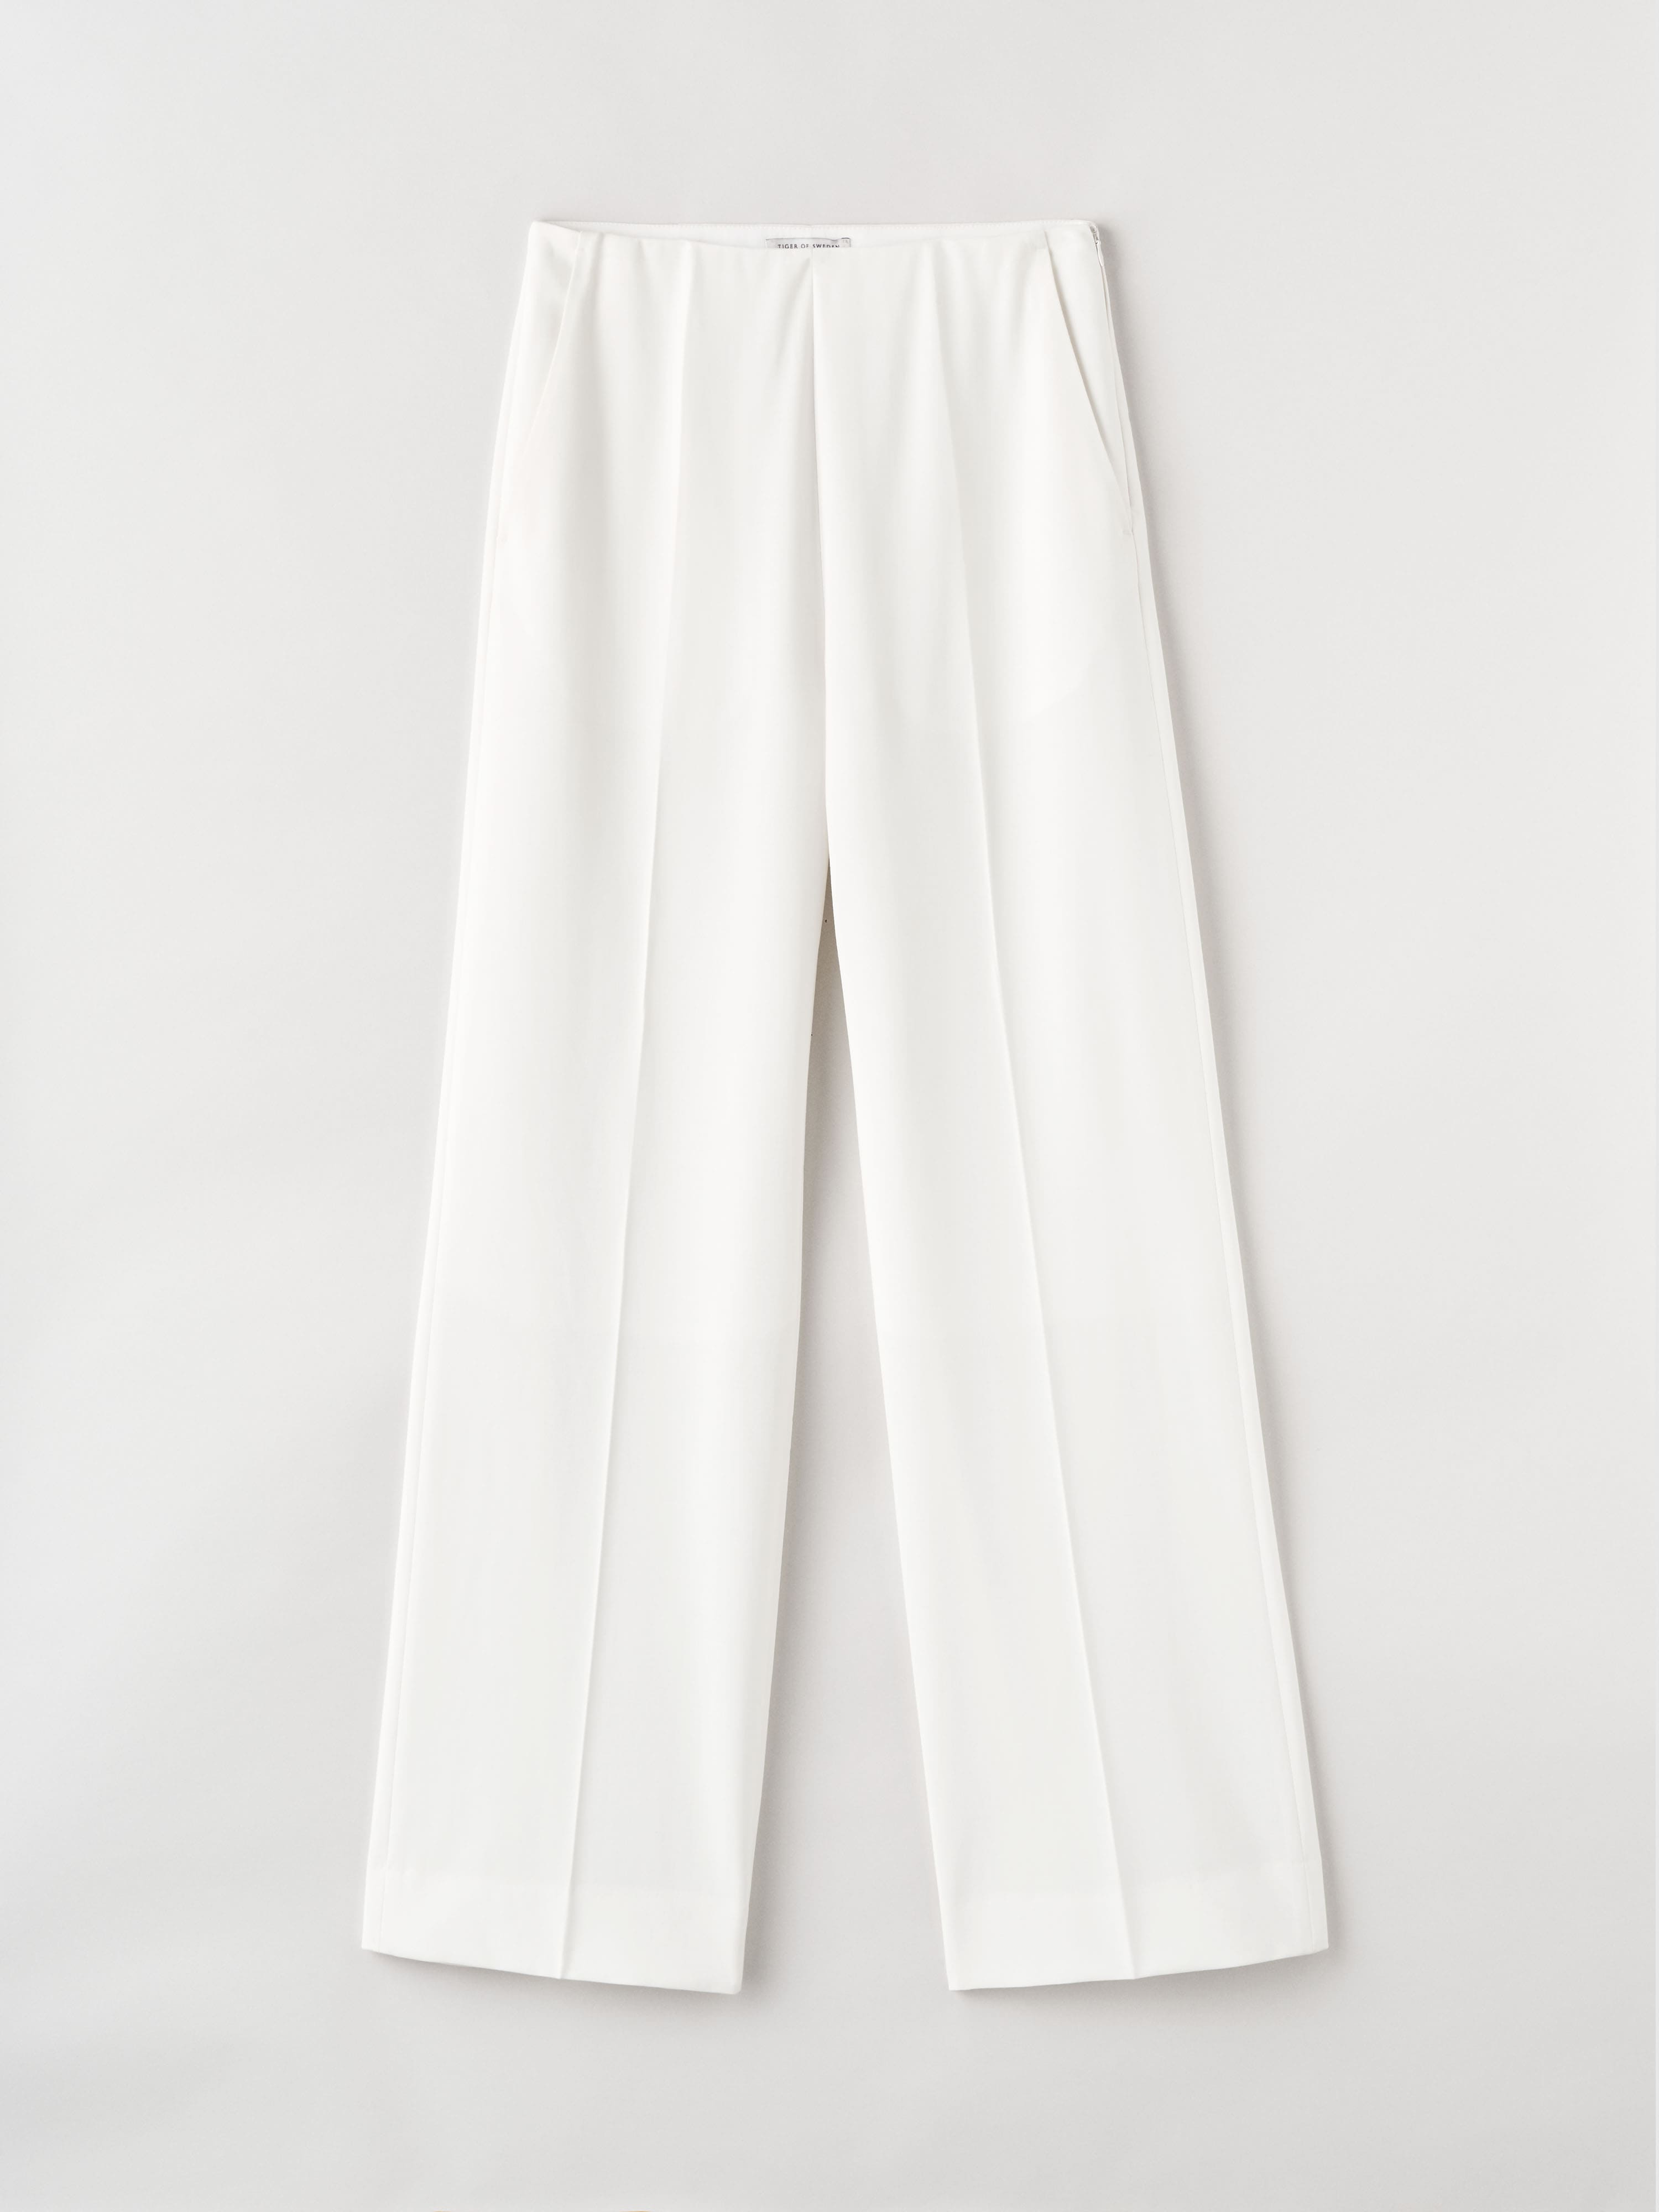 TIGER OF SWEDEN Eedit Trousers in White S70902020 | eightywingold 